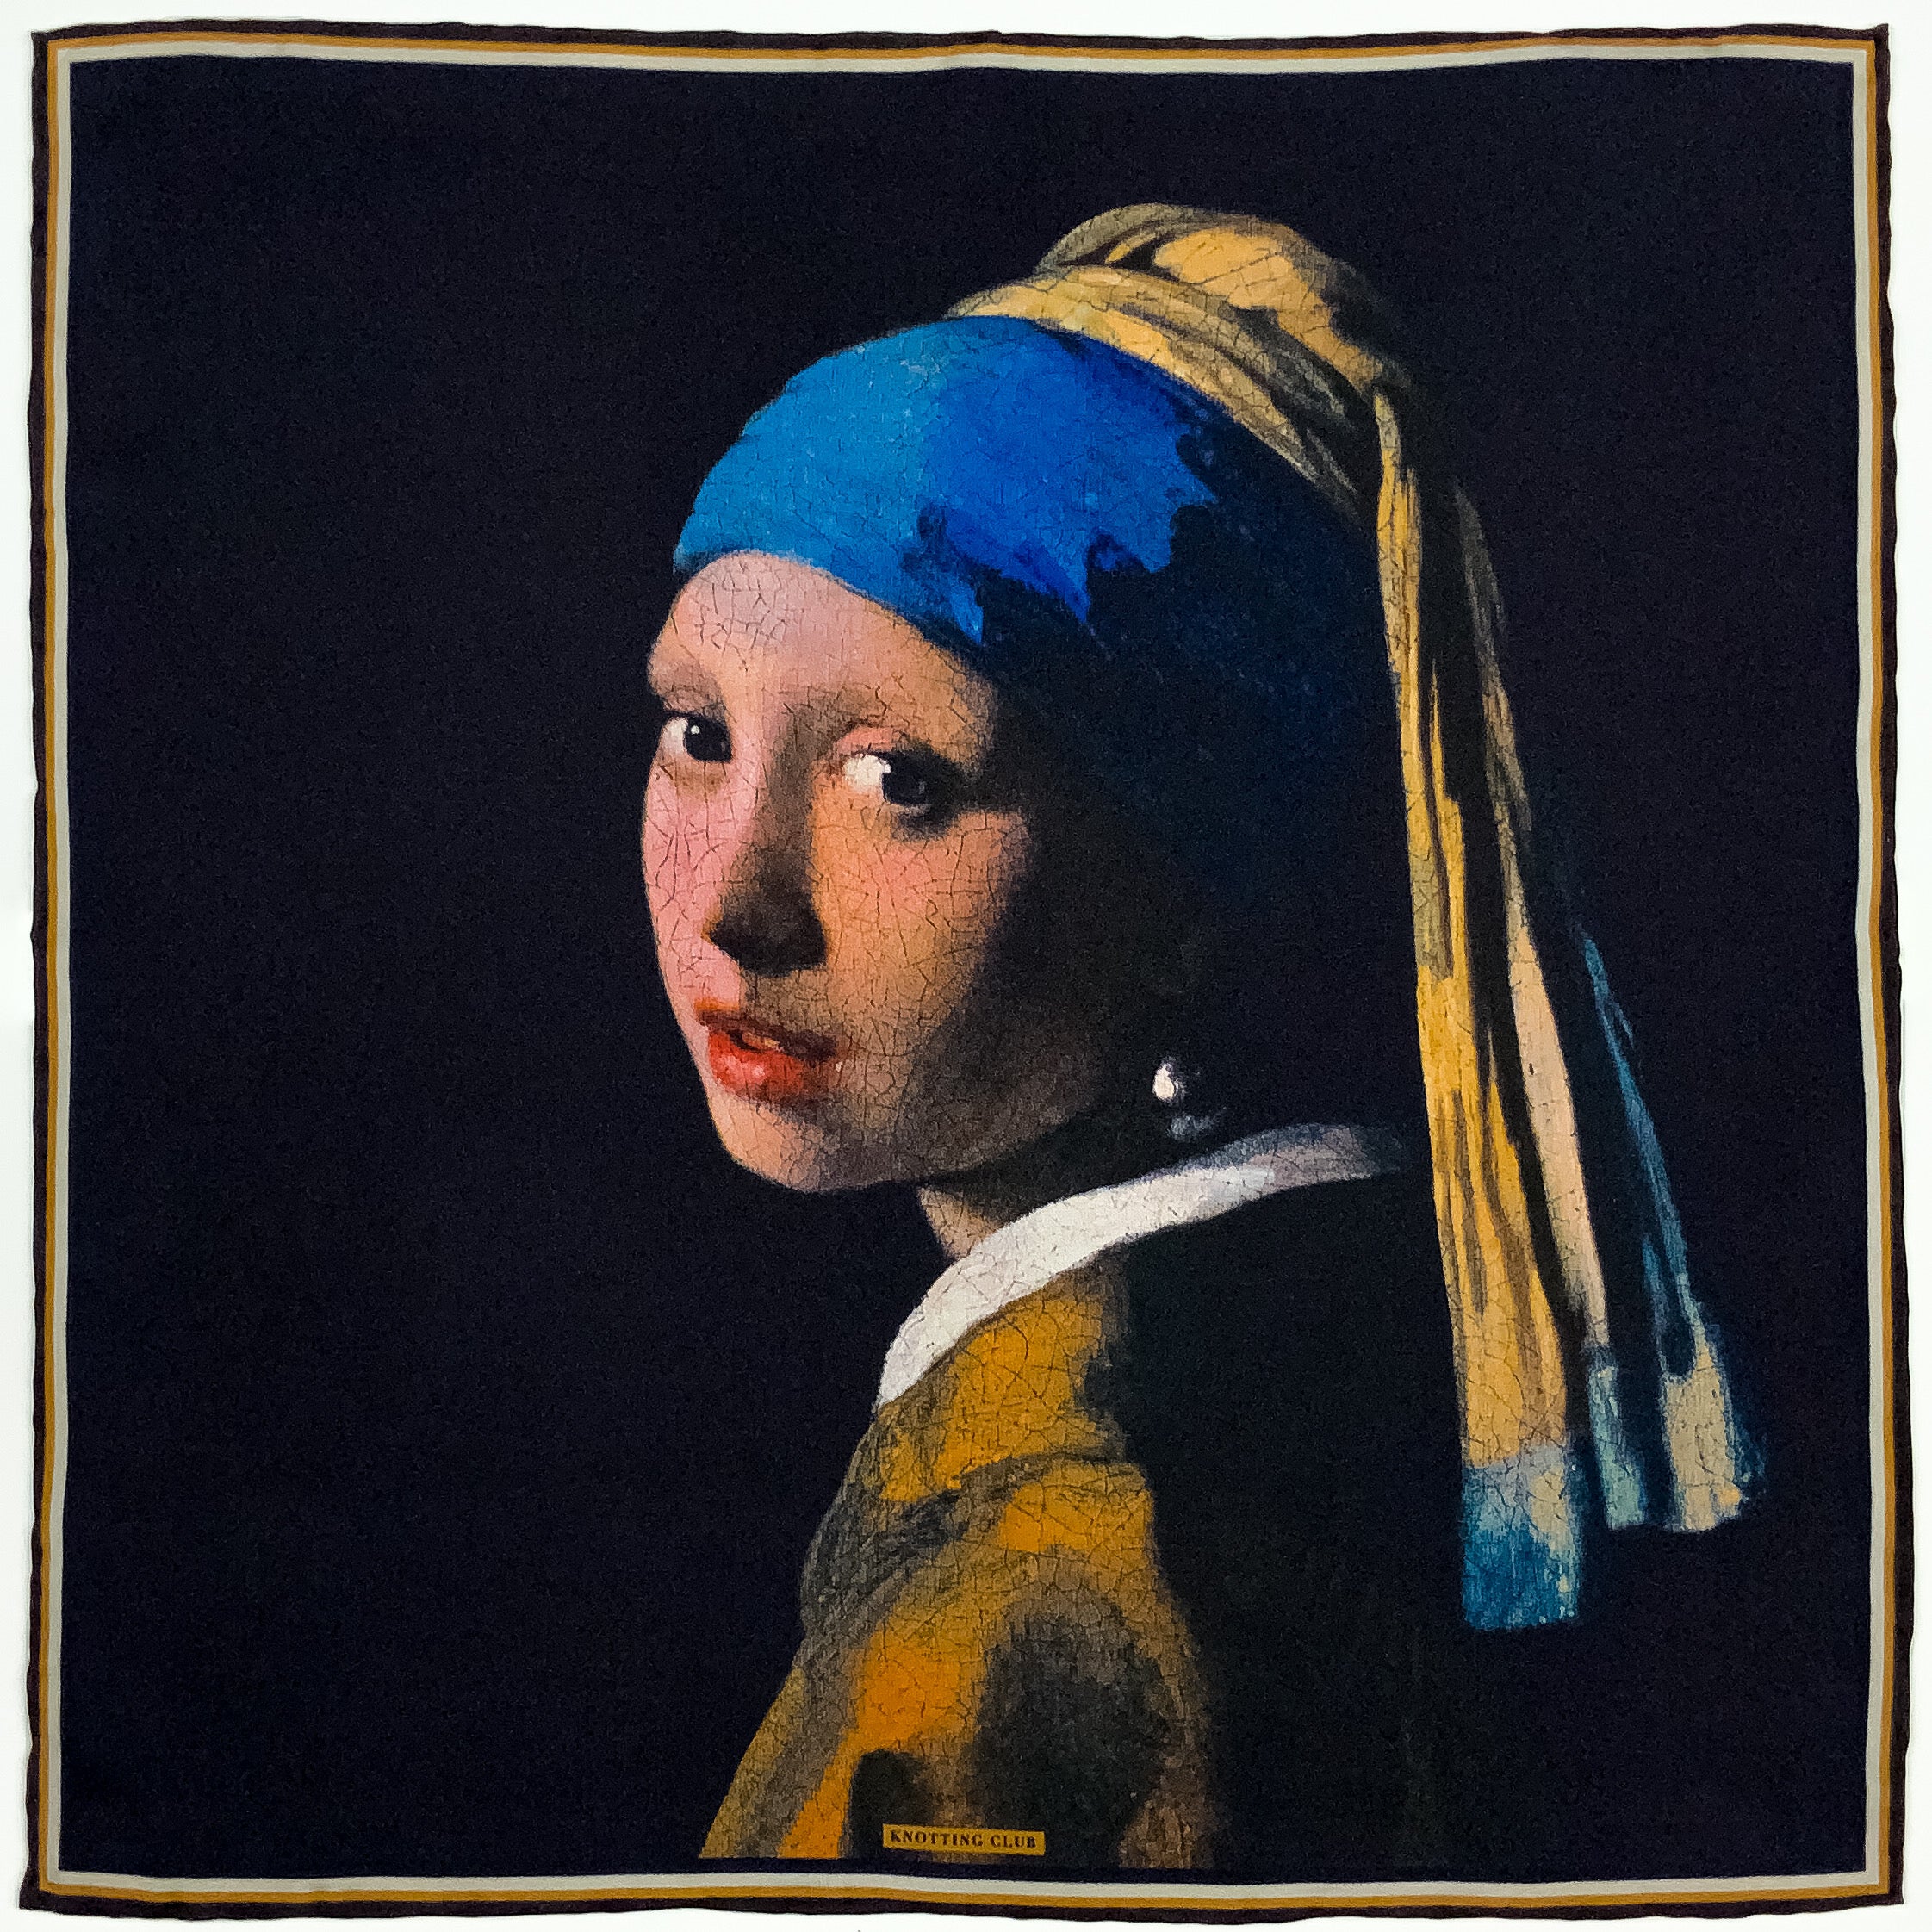 Girl with a pearl earring historical fine art silk pocket square printed on 16mm mulberry silk twill and with hand rolled edges.